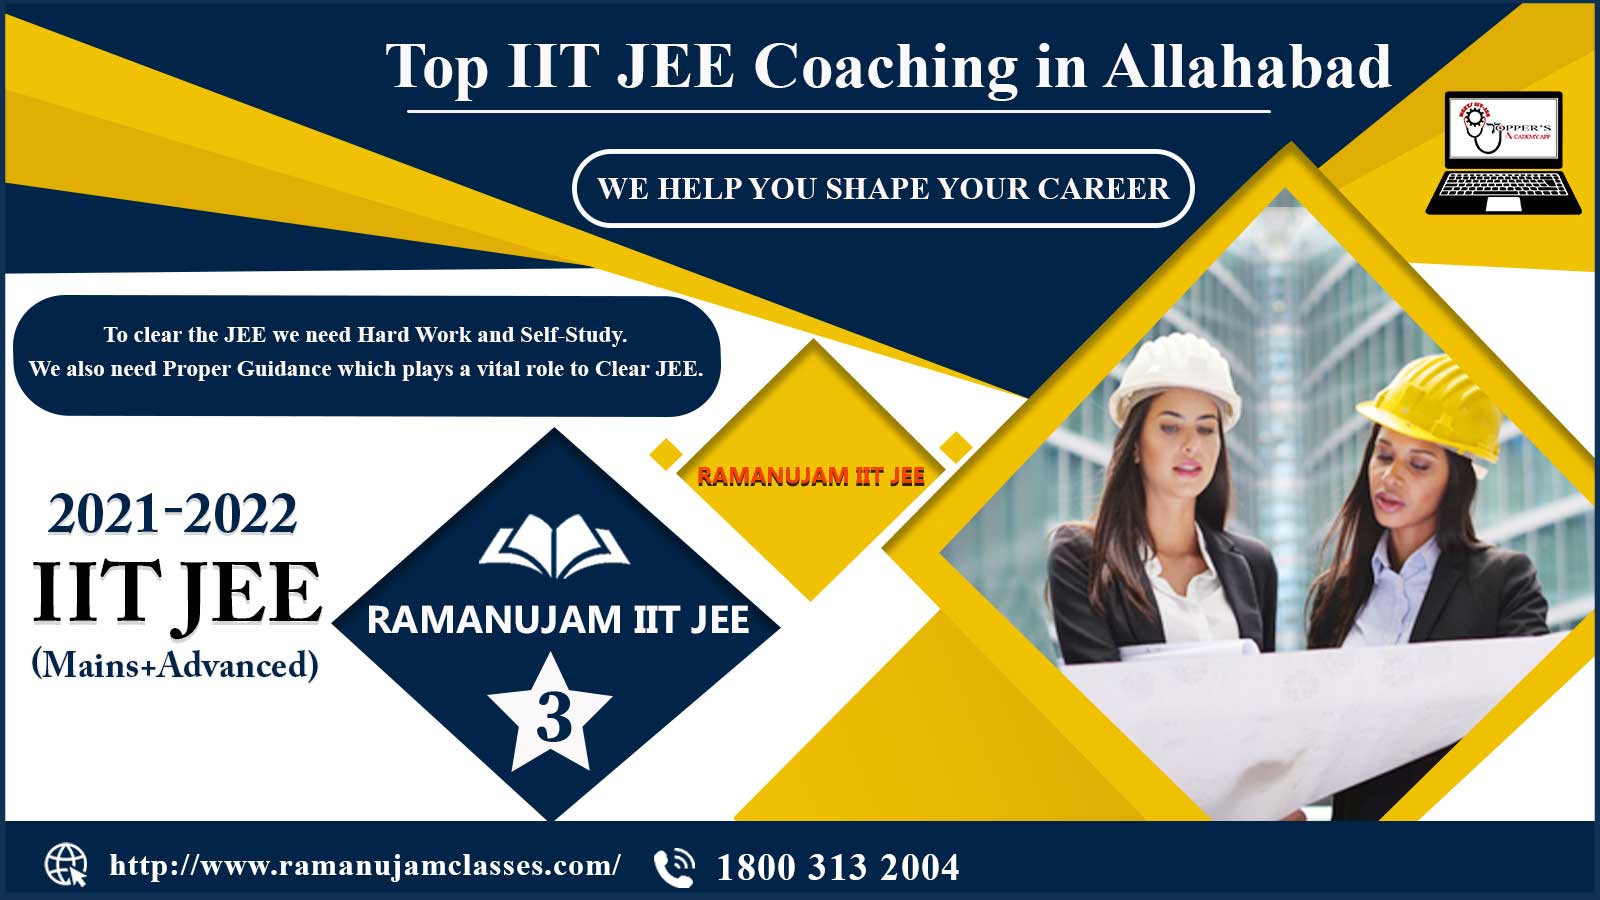 Best IIT JEE Coaching Centers in Allahabad